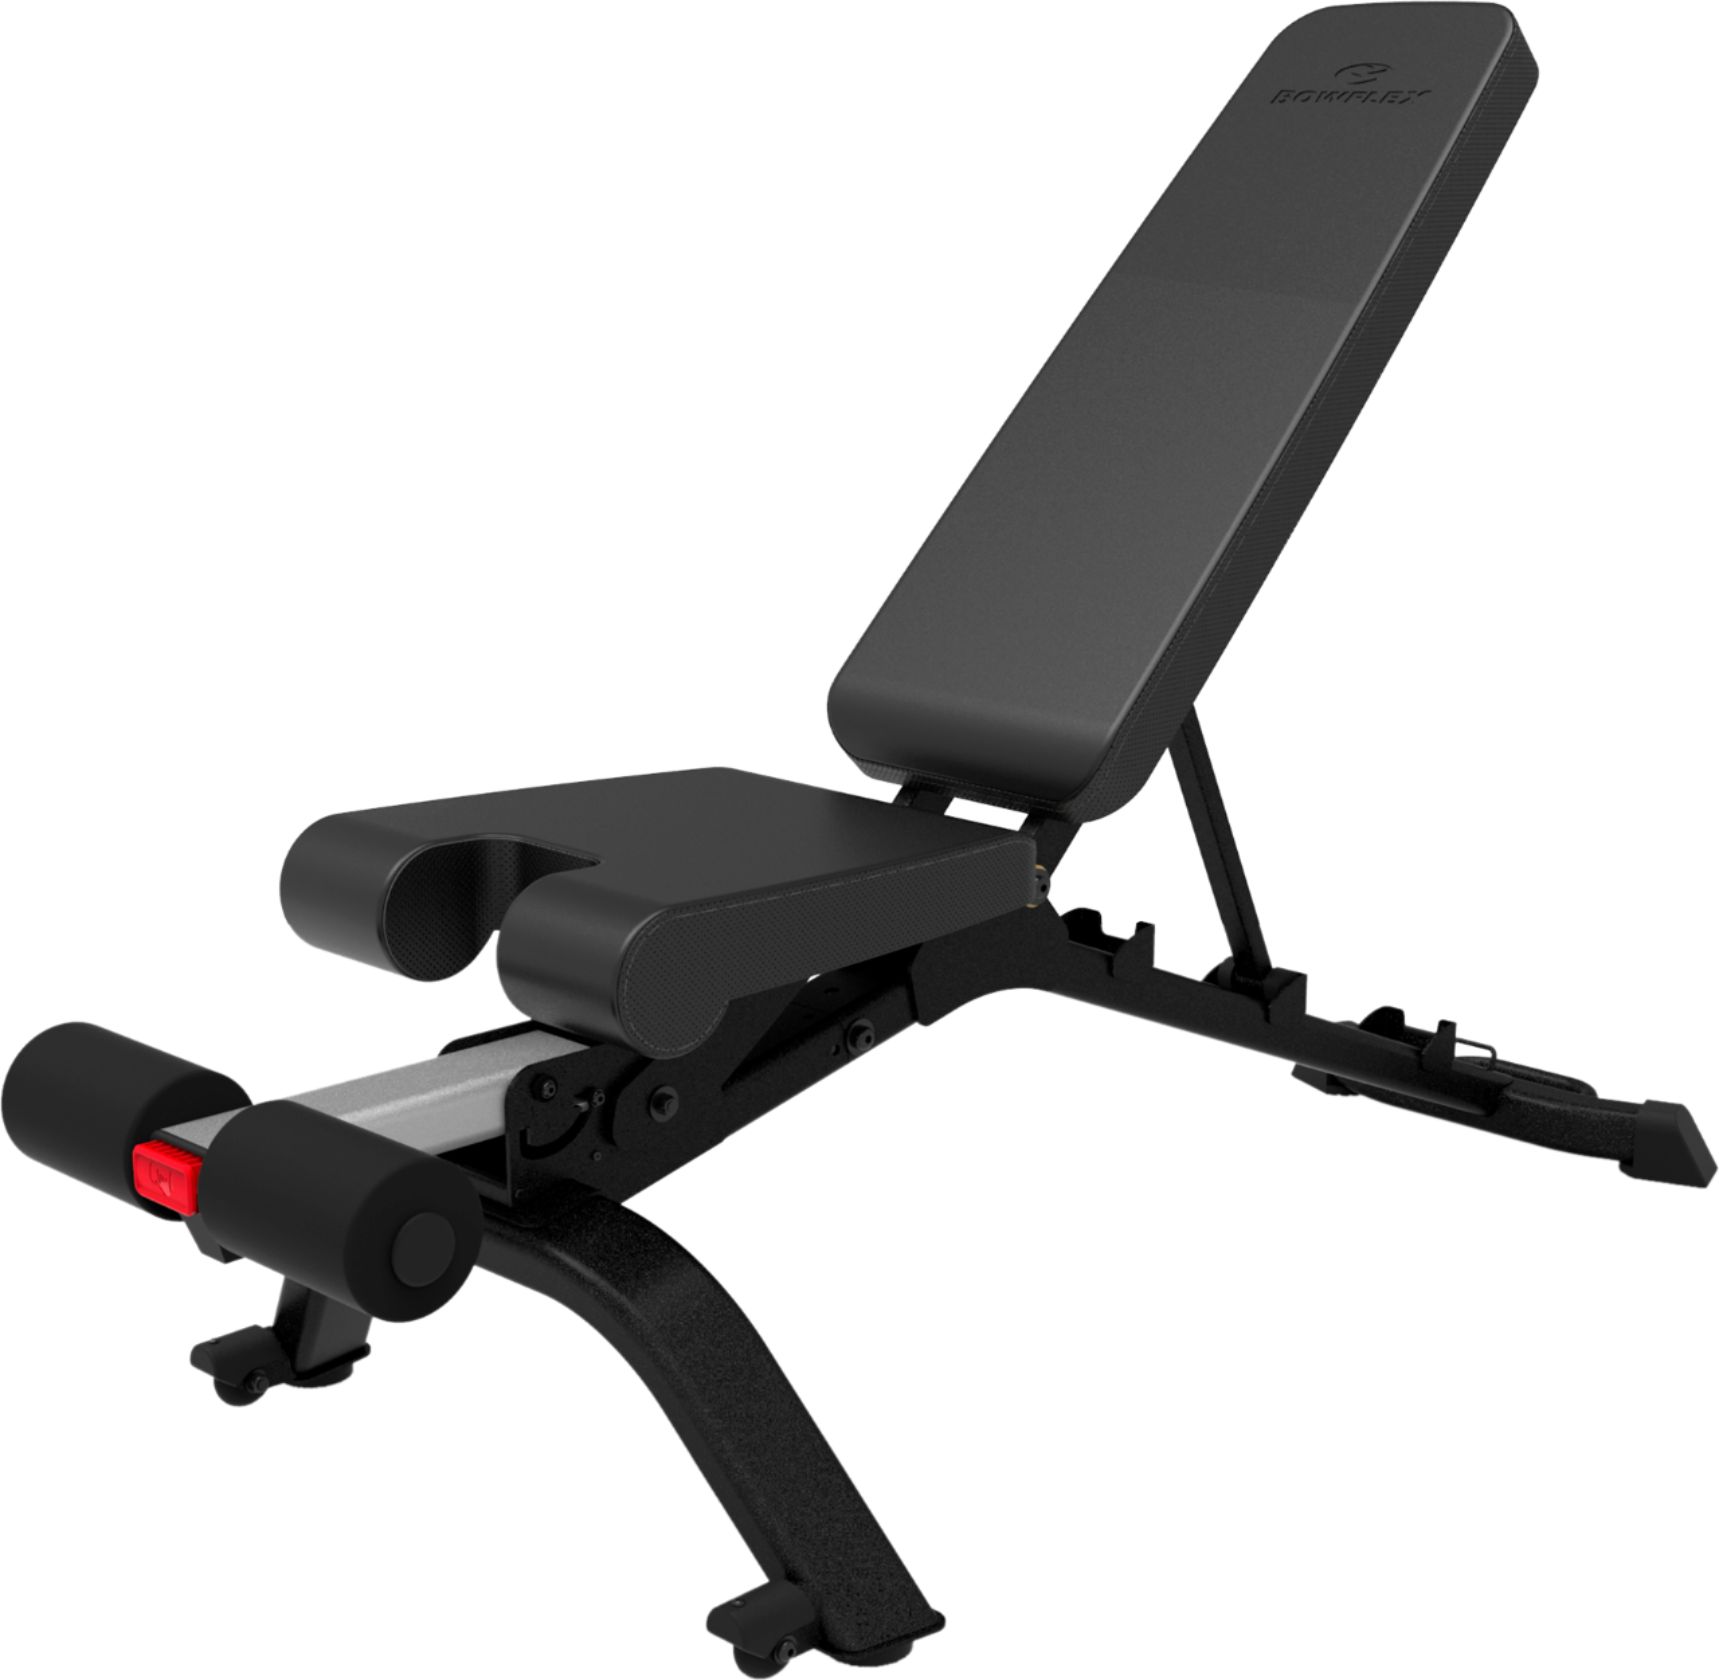 Bowflex Credit Card Review Bowflex SelectTech 4.1 Adjustable Bench / What will your next major